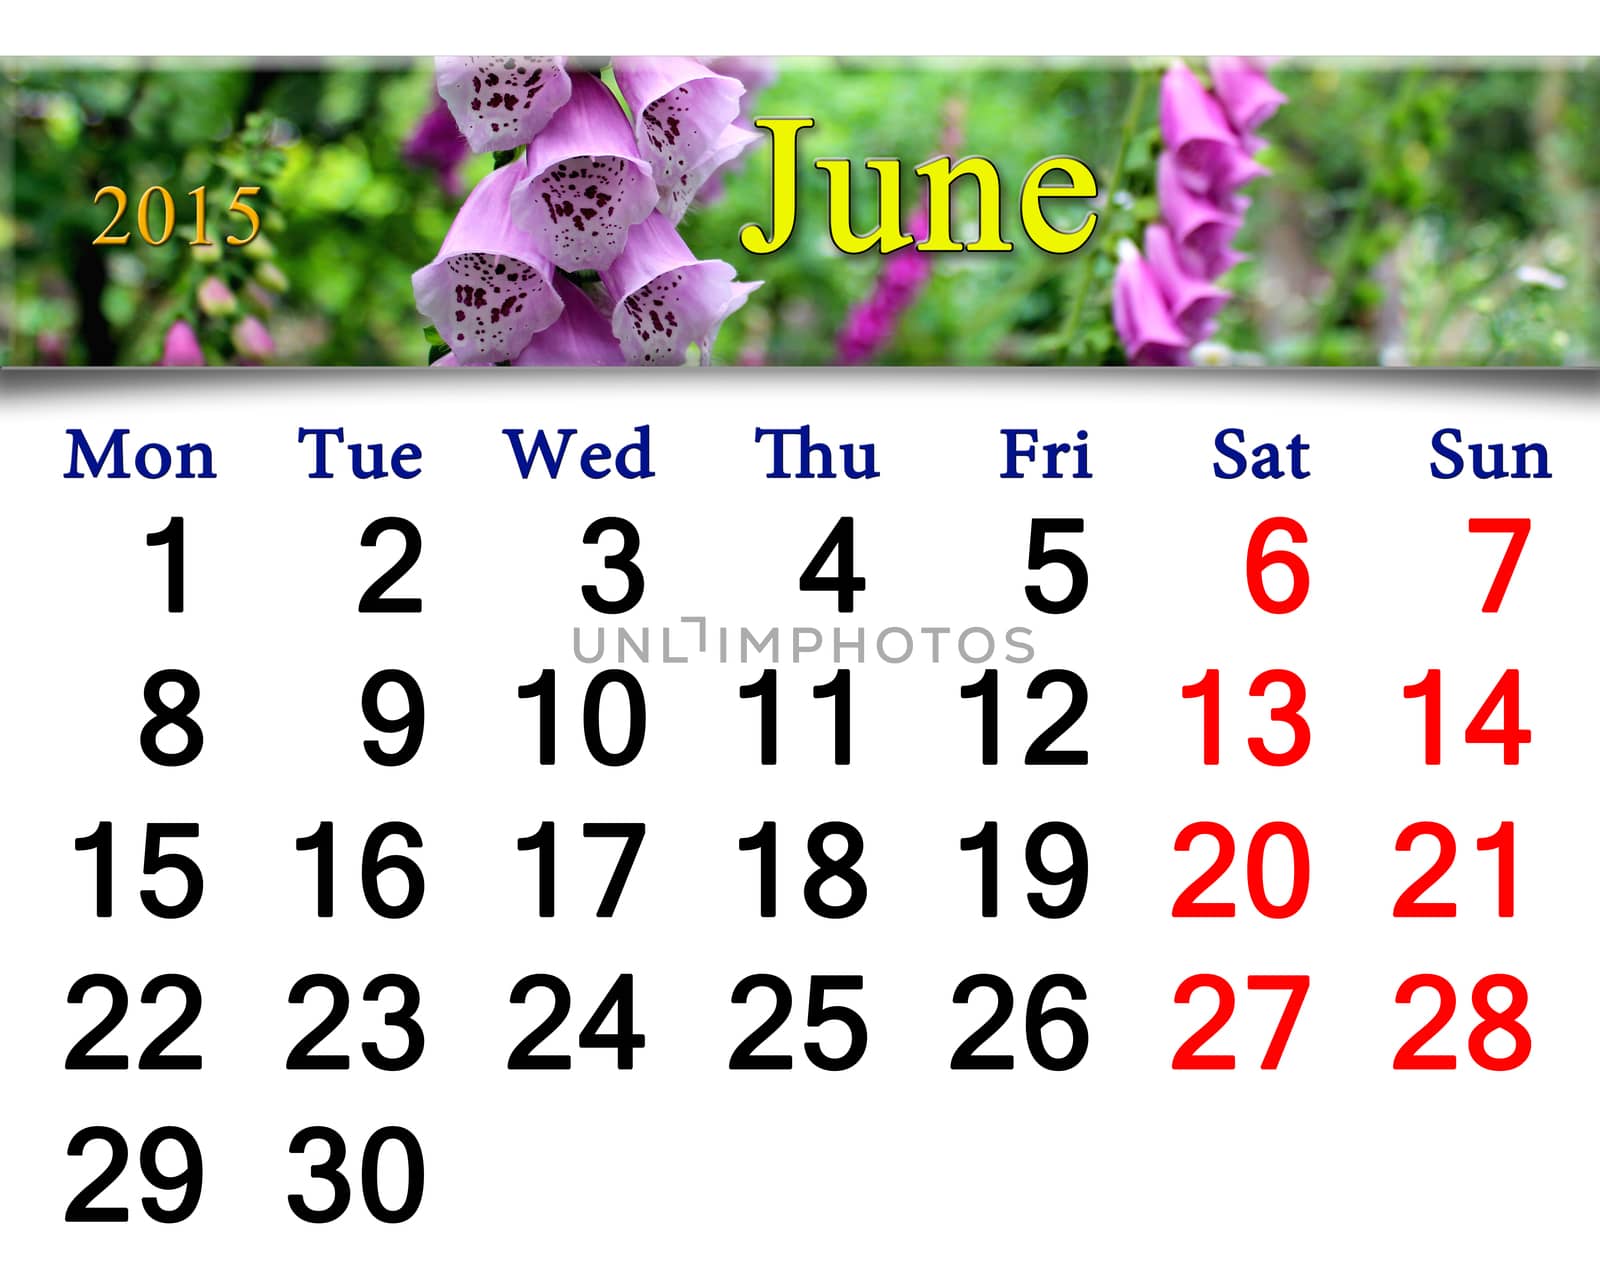 calendar for June of 2015 with flowers of flowers of lilac bluebells